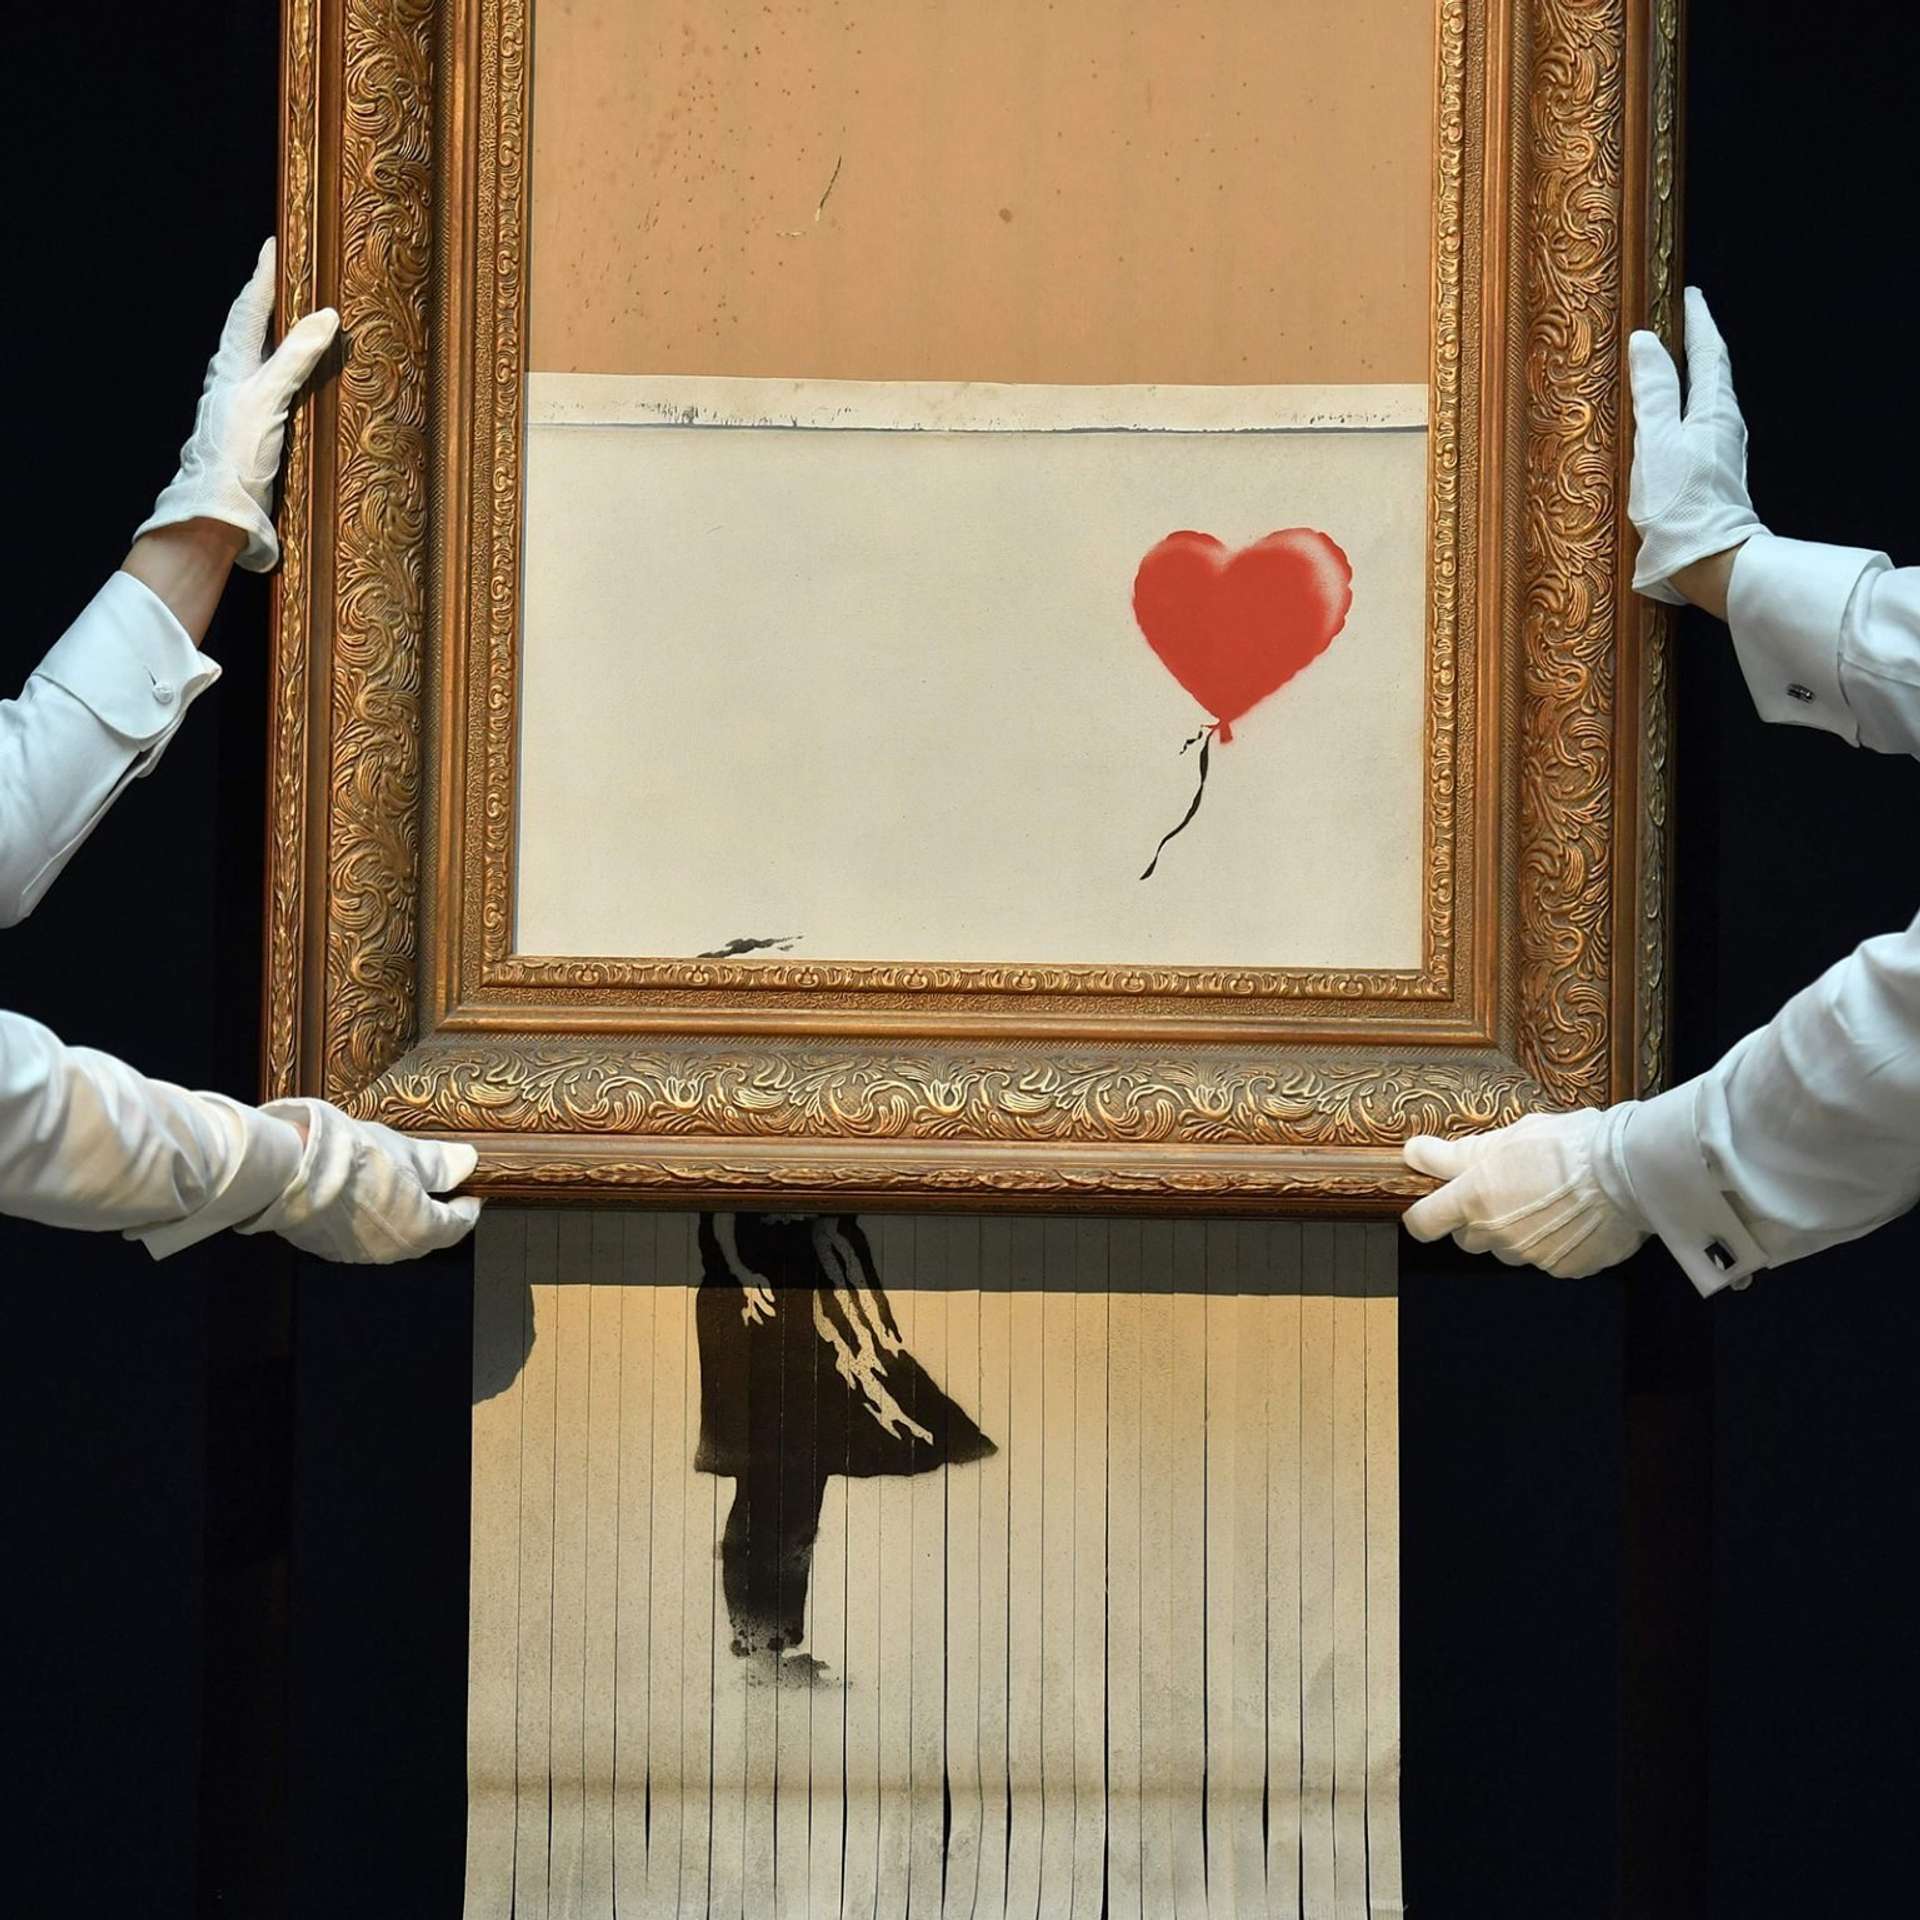 A photograph representing the half-shredded Girl With Balloon artwork Banksy performatively destroyed at Sotheby's in 2018